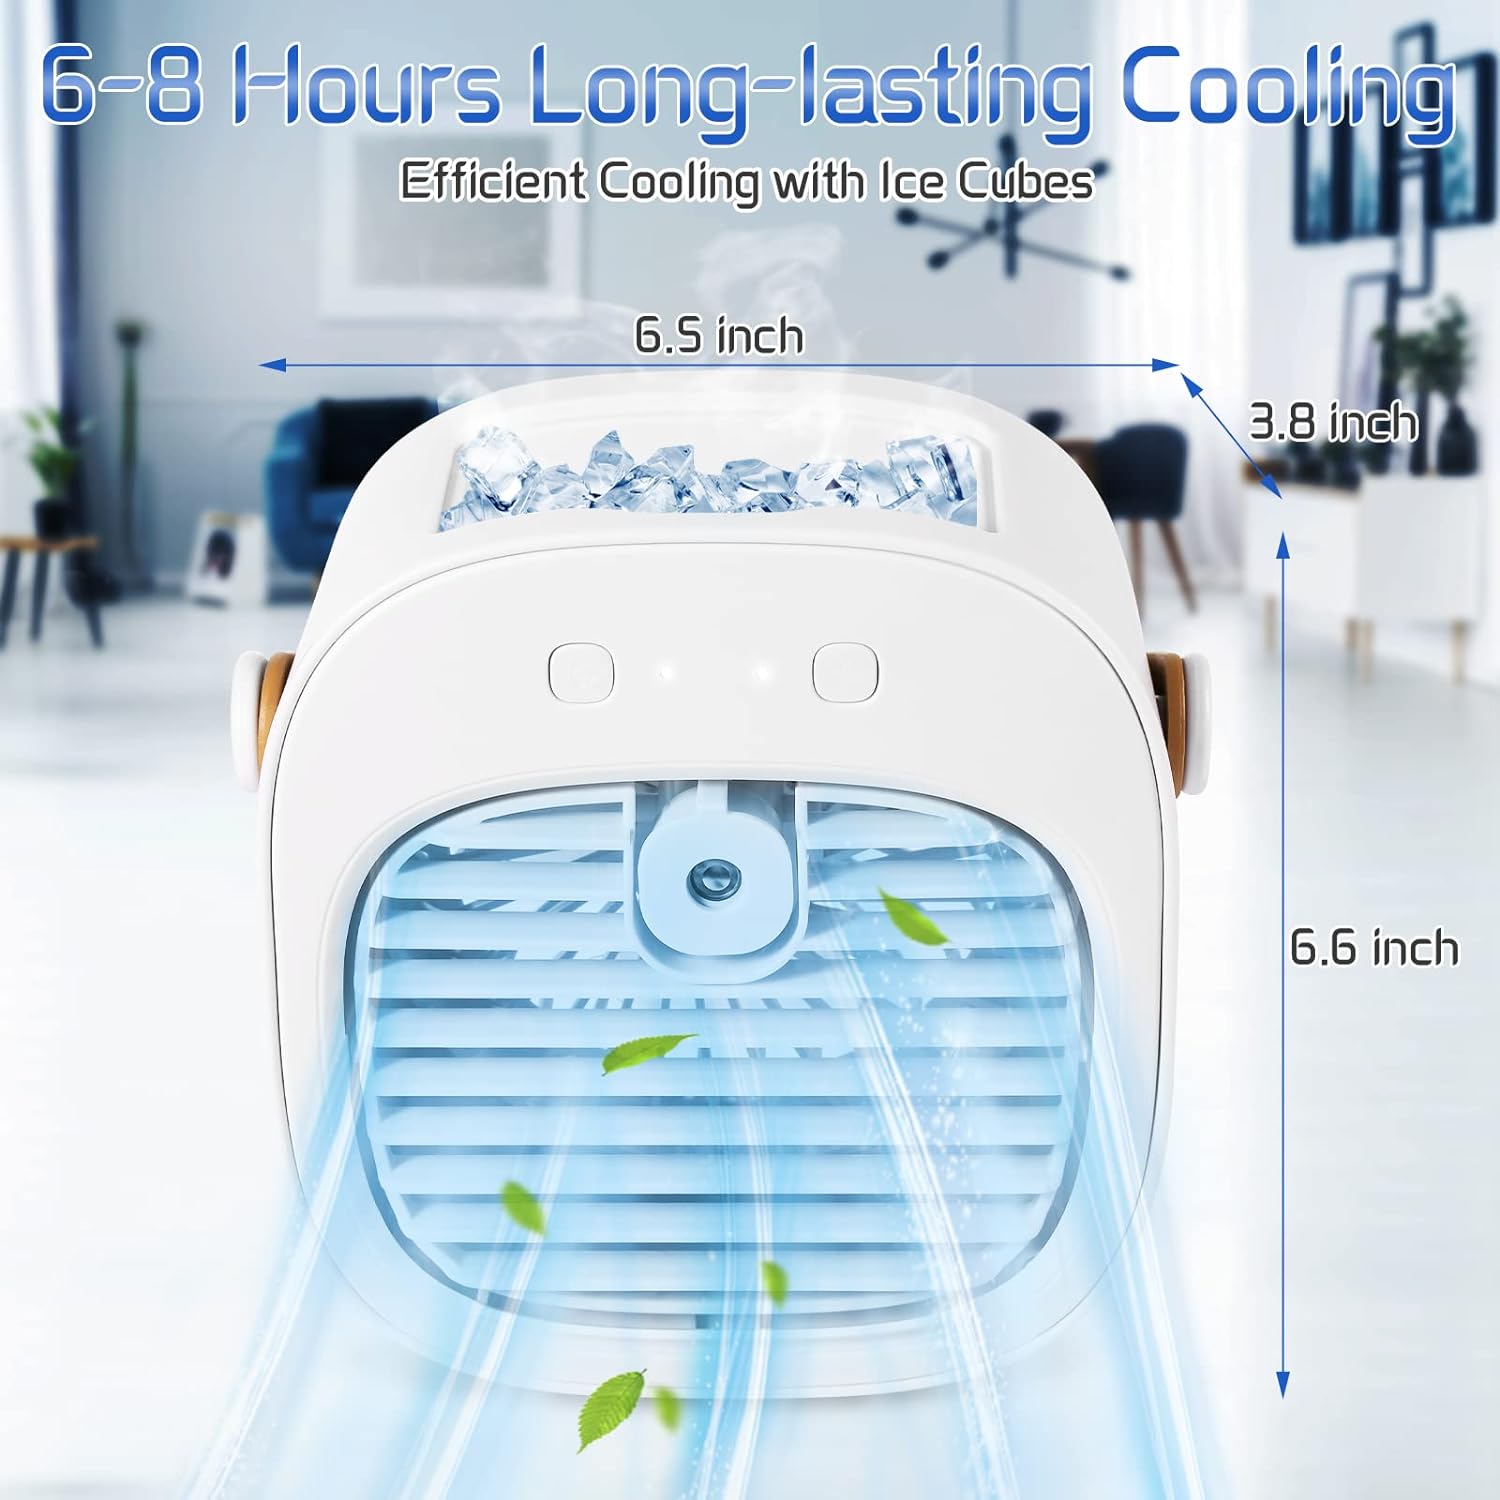 Generic Personal Portable Air Conditioner, 6000mAh Mini Air Cooler Conditioner,USB Rechargeable Air Conditioner,3 Speed Quiet Fan for B